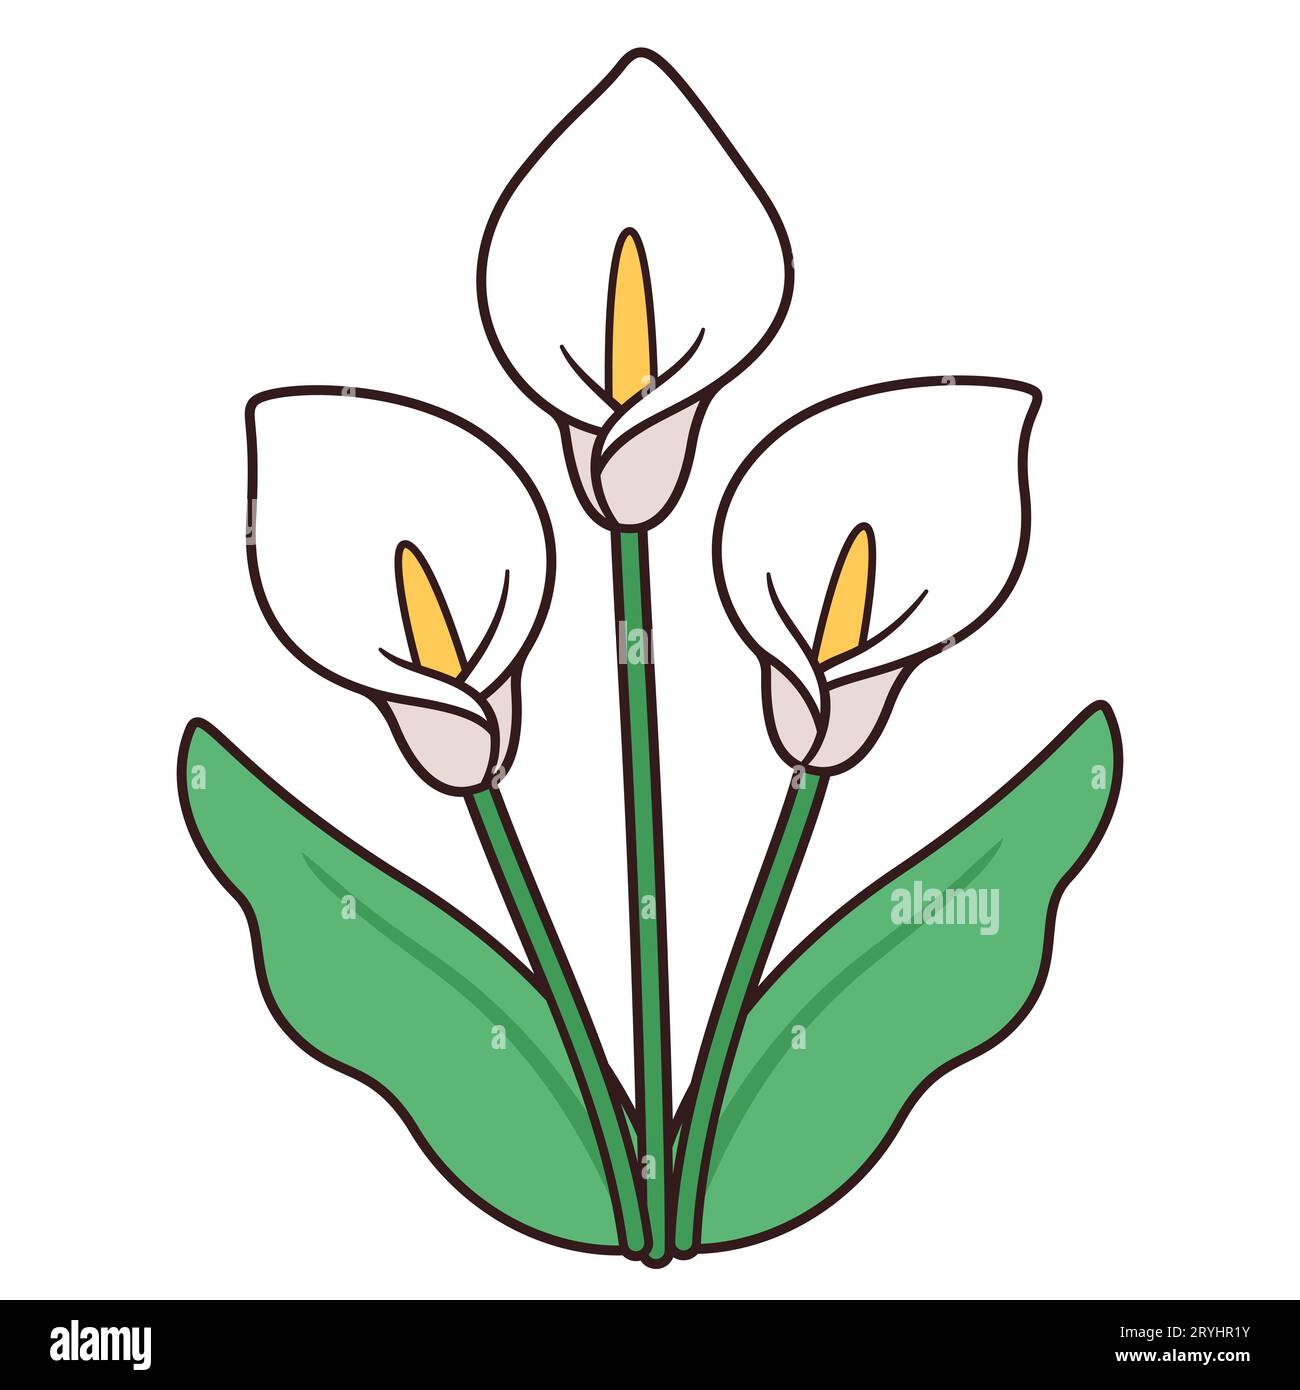 Calla lily flower bouquet drawing, simple and elegant design. Three ...